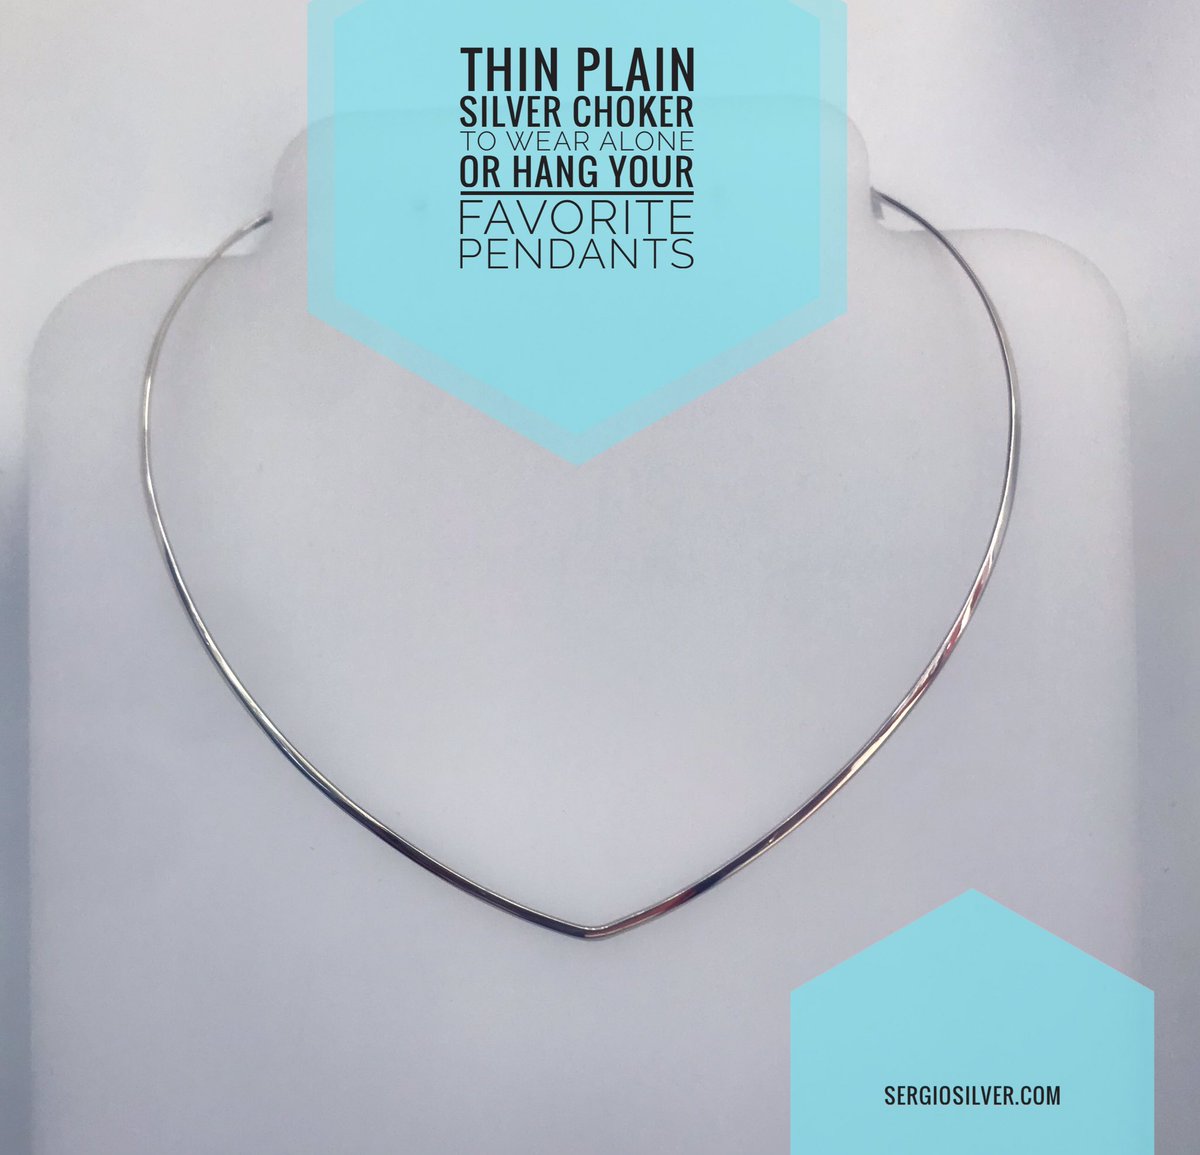 Perfect choker necklace to wear alone or to hang your favorite pendants.

#sergiosilvercoz #choker #silver #jewelry #online #store #shop #shopping #cozumel #onlineshop #silverchoker #onlineshopping #silverjewelry